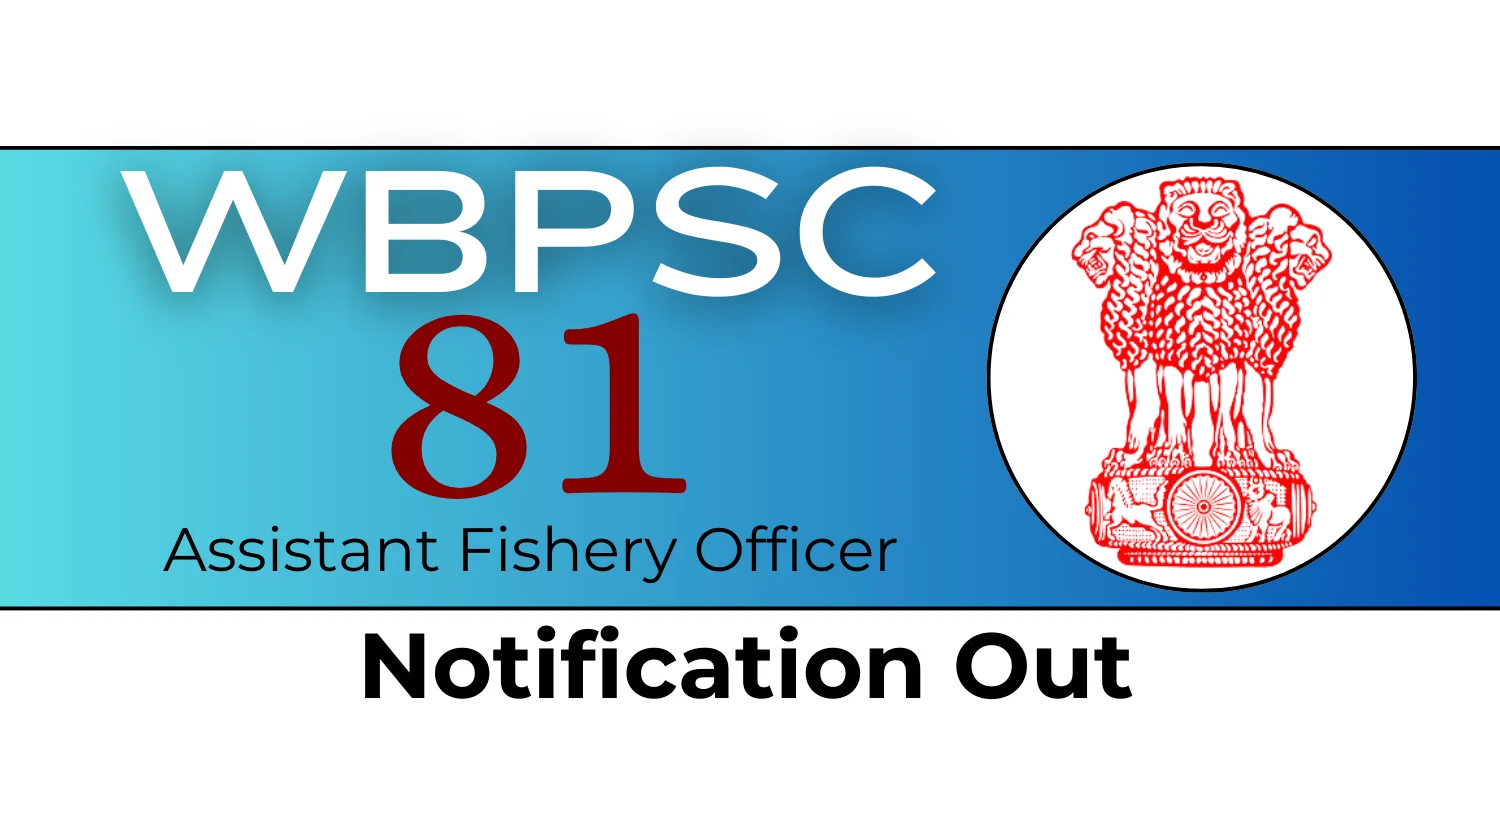 WBPSC Assistant Fishery Officer